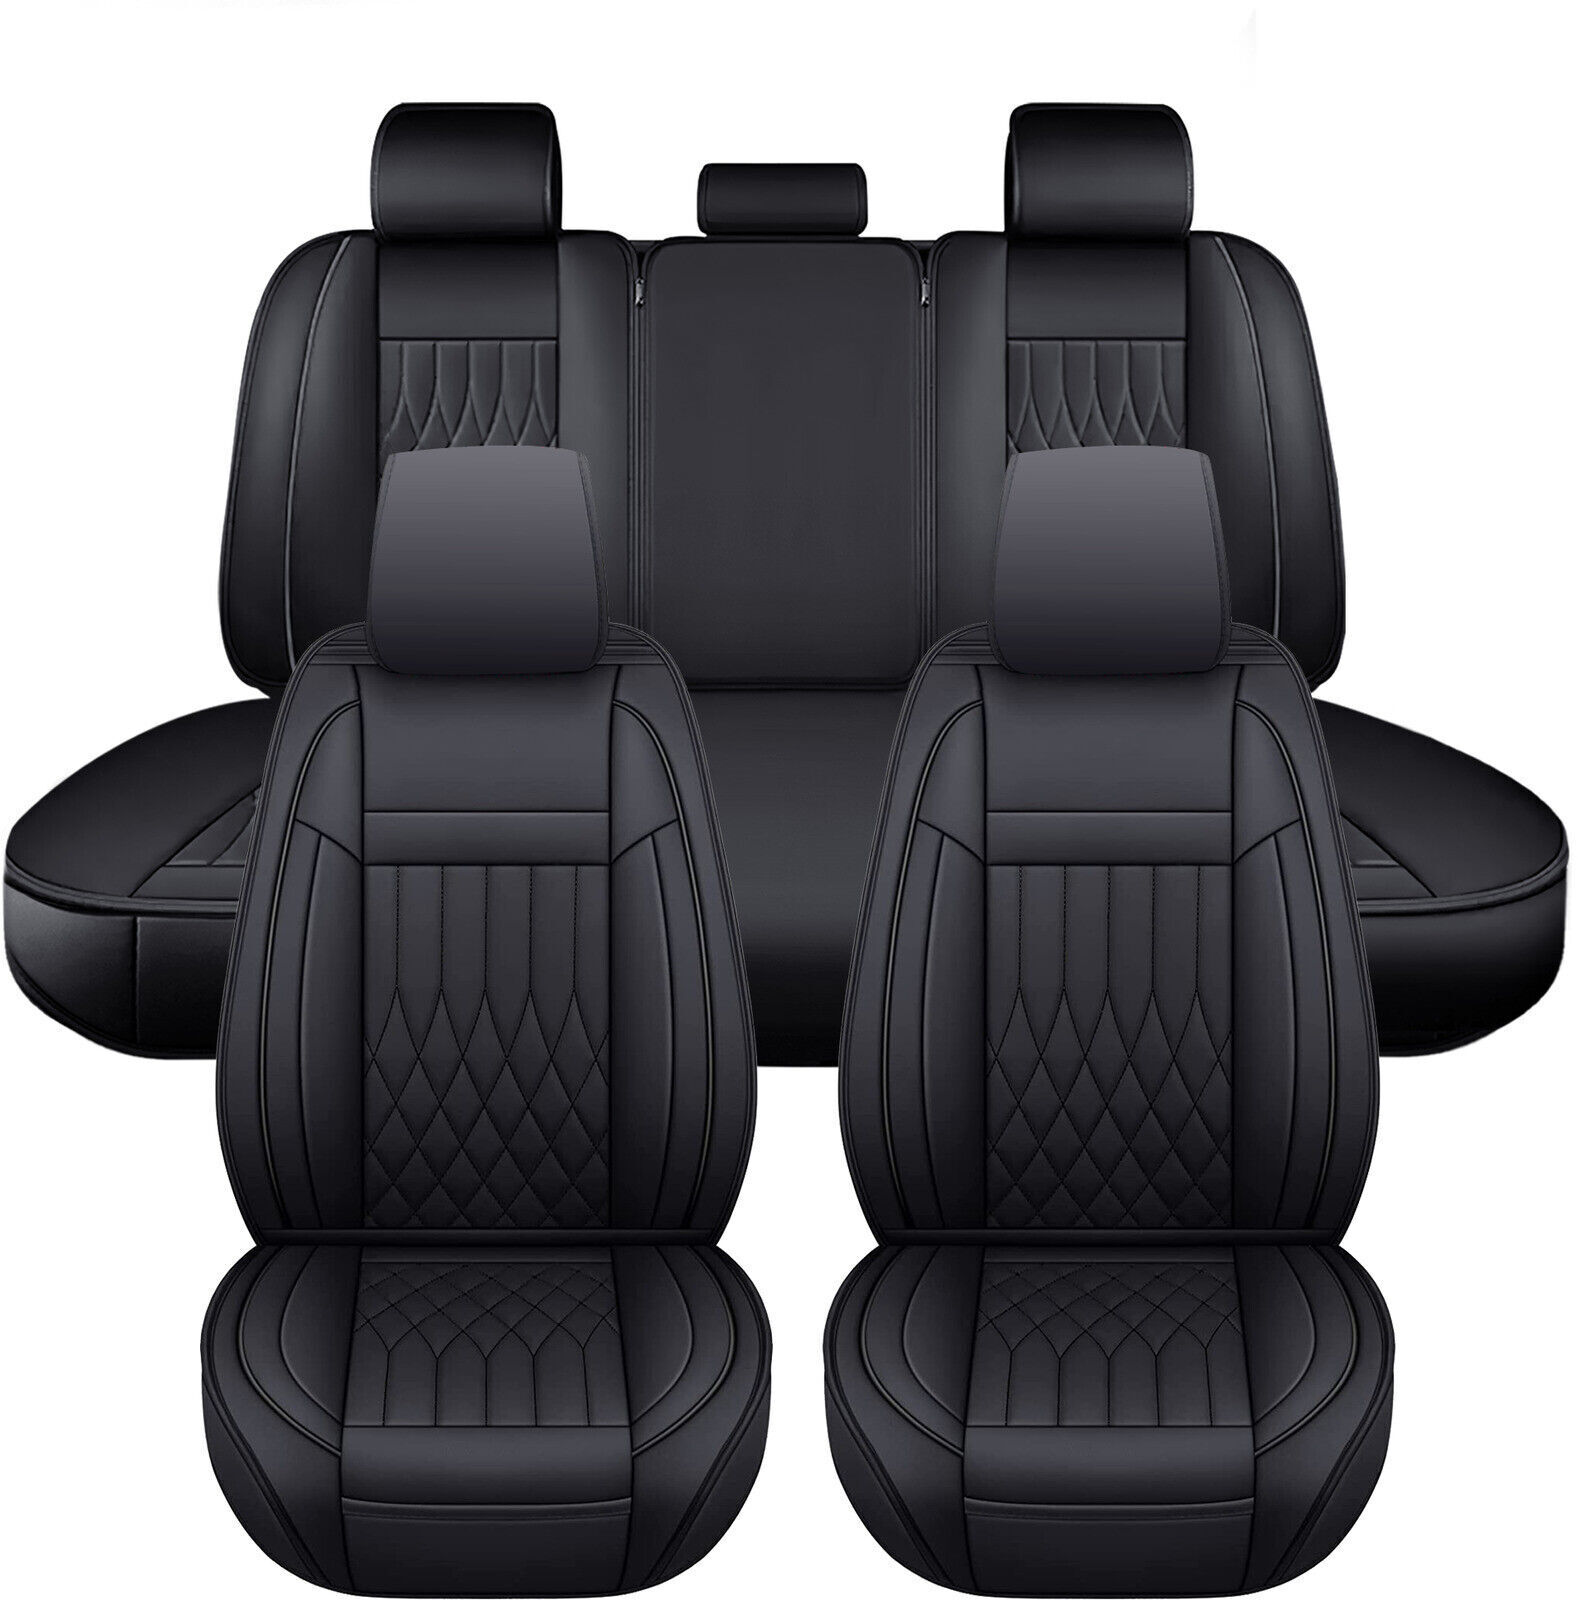 Car Seat Covers Leather Full Set For Honda Civic/Accord/CR-V/Clarity/Insight